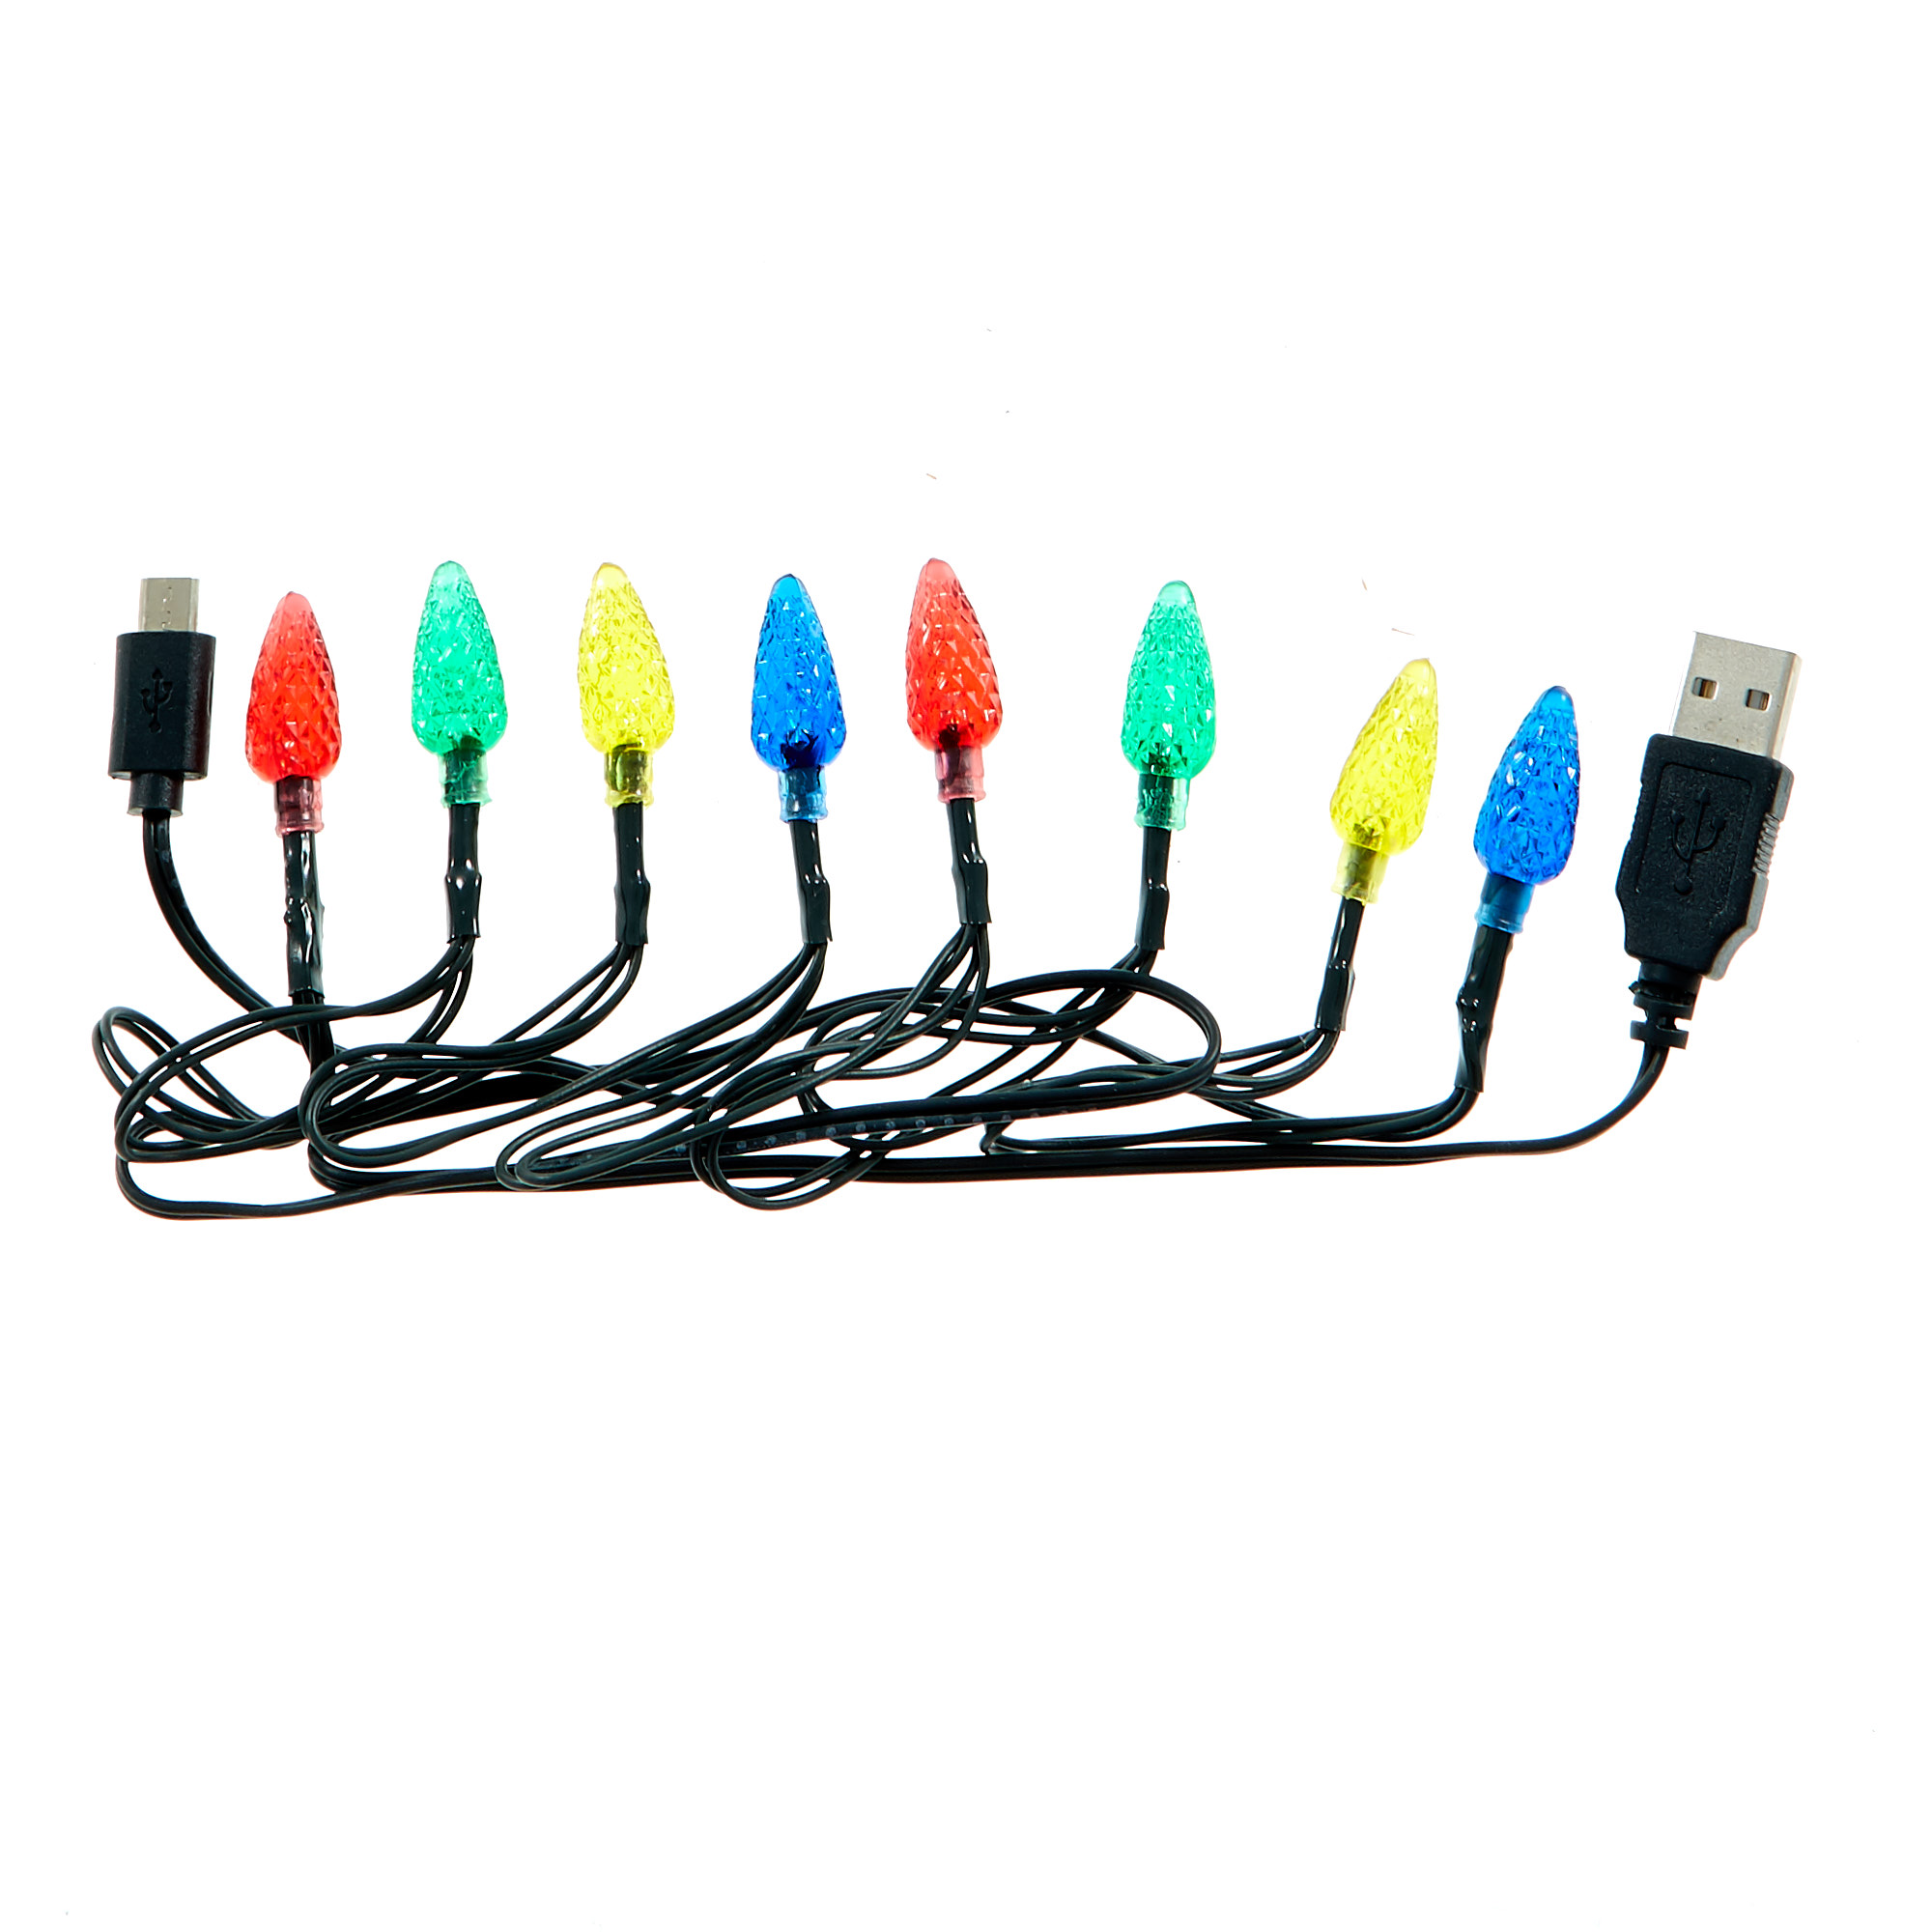 USB Christmas Light-Up Phone Charger - Android